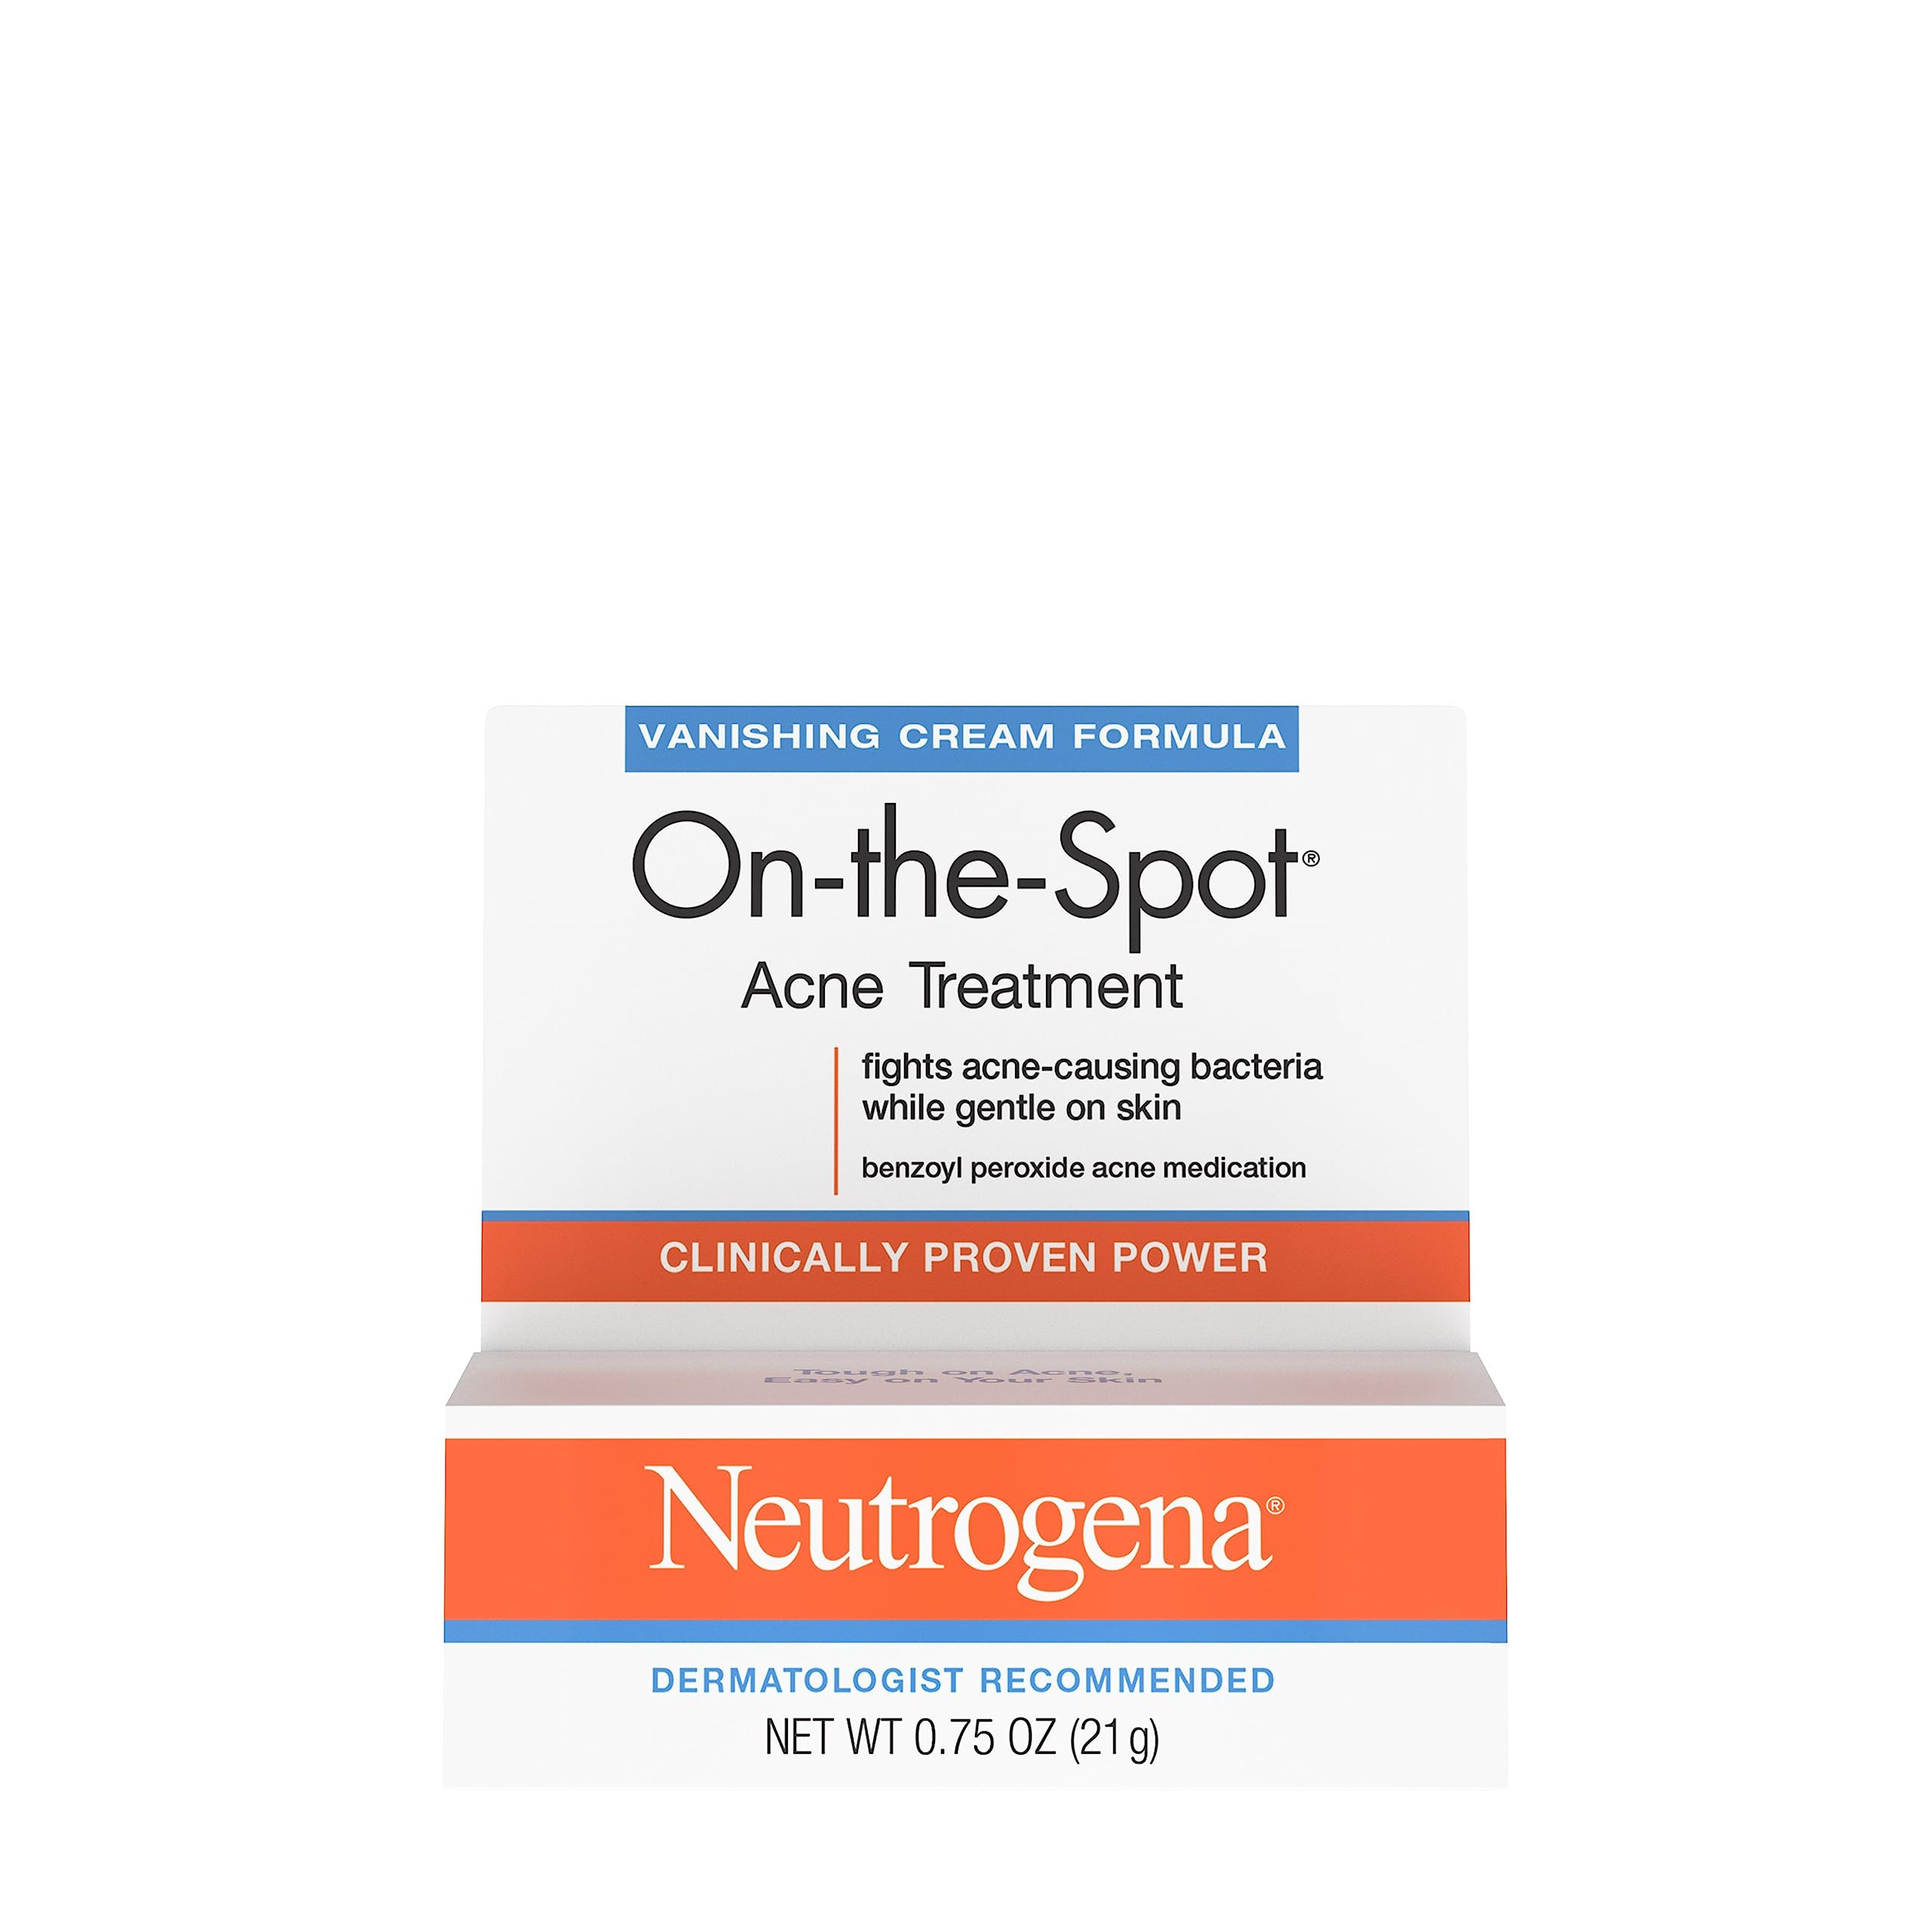 Neutrogena On-The-Spot Acne Treatment Gel with Benzoyl Peroxide - Gentle Face Acne Medicine for Acne Prone Skin, 0.75 oz [Subscribe & Save] $4.62